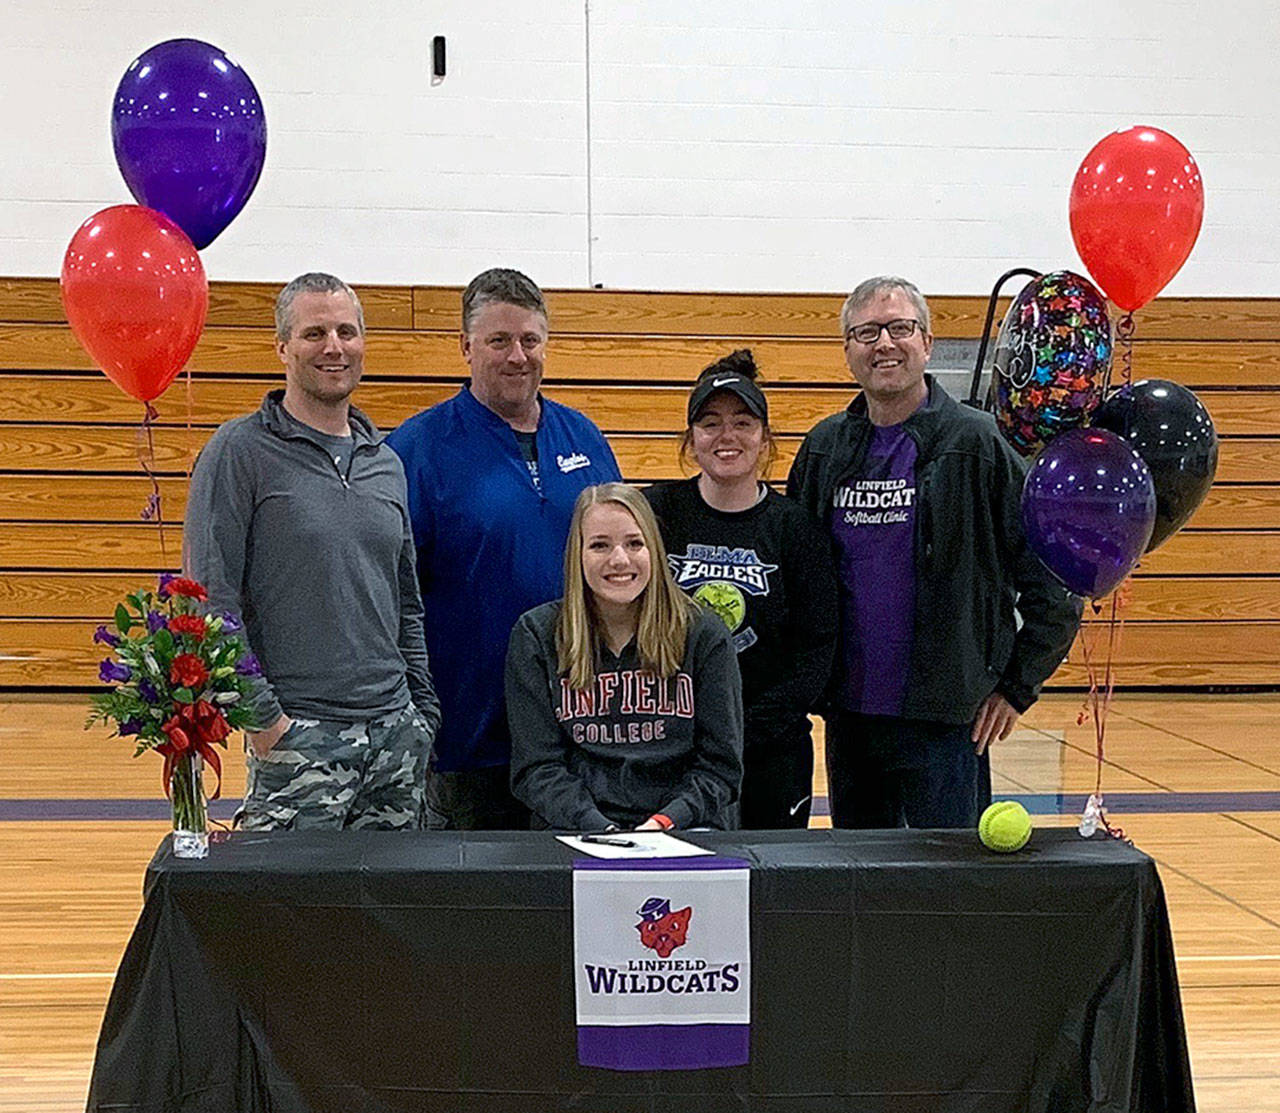 Elma softball player Molly Johnston, sitting, is flanked by her coaches after the senior signed a National Letter of Intent on March 17 to play for Linfield College in McMinnville, Ore. next season. Pictured are (from left): Travel ball coach Steve Poler, Elma head coach Roger Elliott, Elma assistant coach Ashley Stancil and travel ball coach Pat Pace. (Submitted photo)